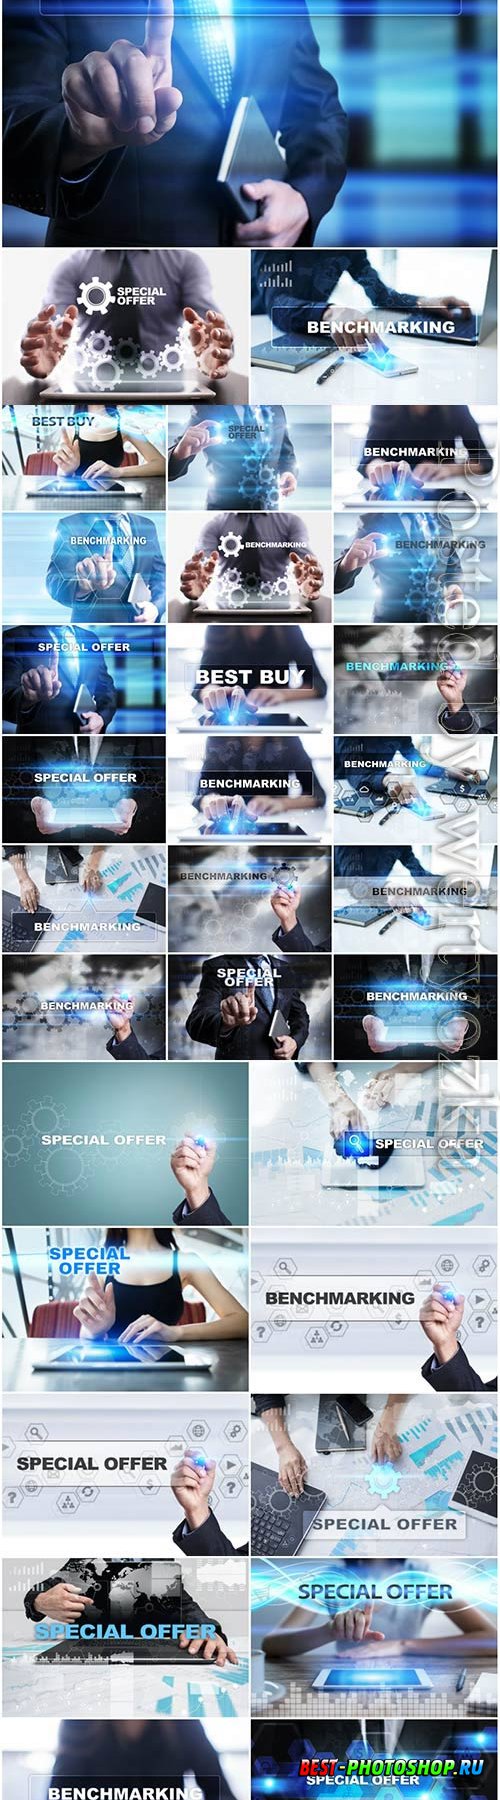 Modern technology and business concept stock photo